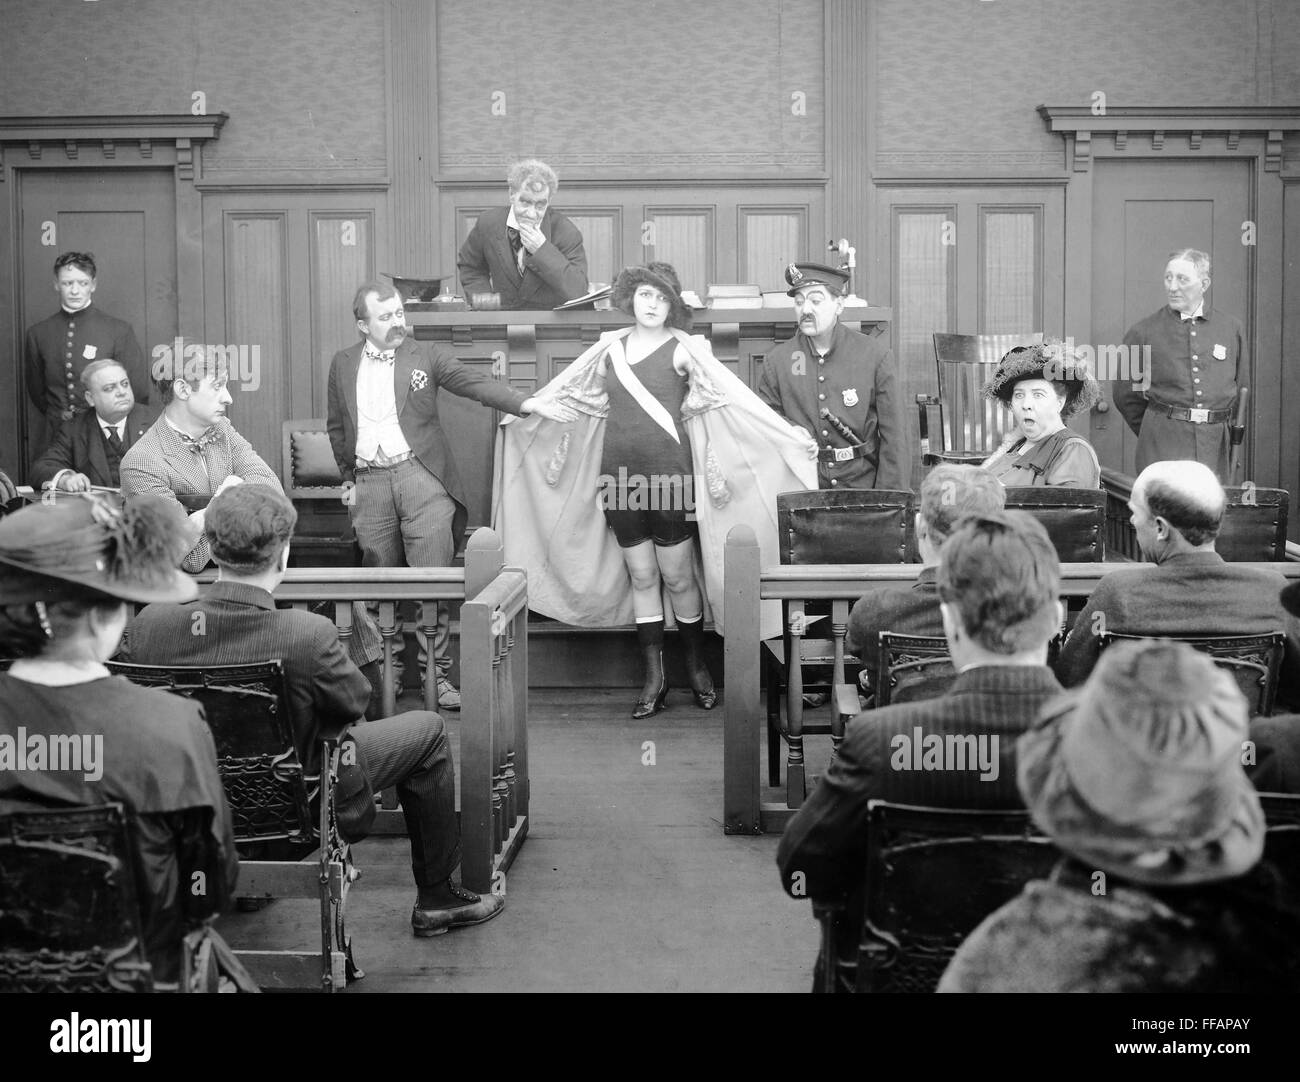 SILENT STILL: COURTROOM Stock Photo Alamy